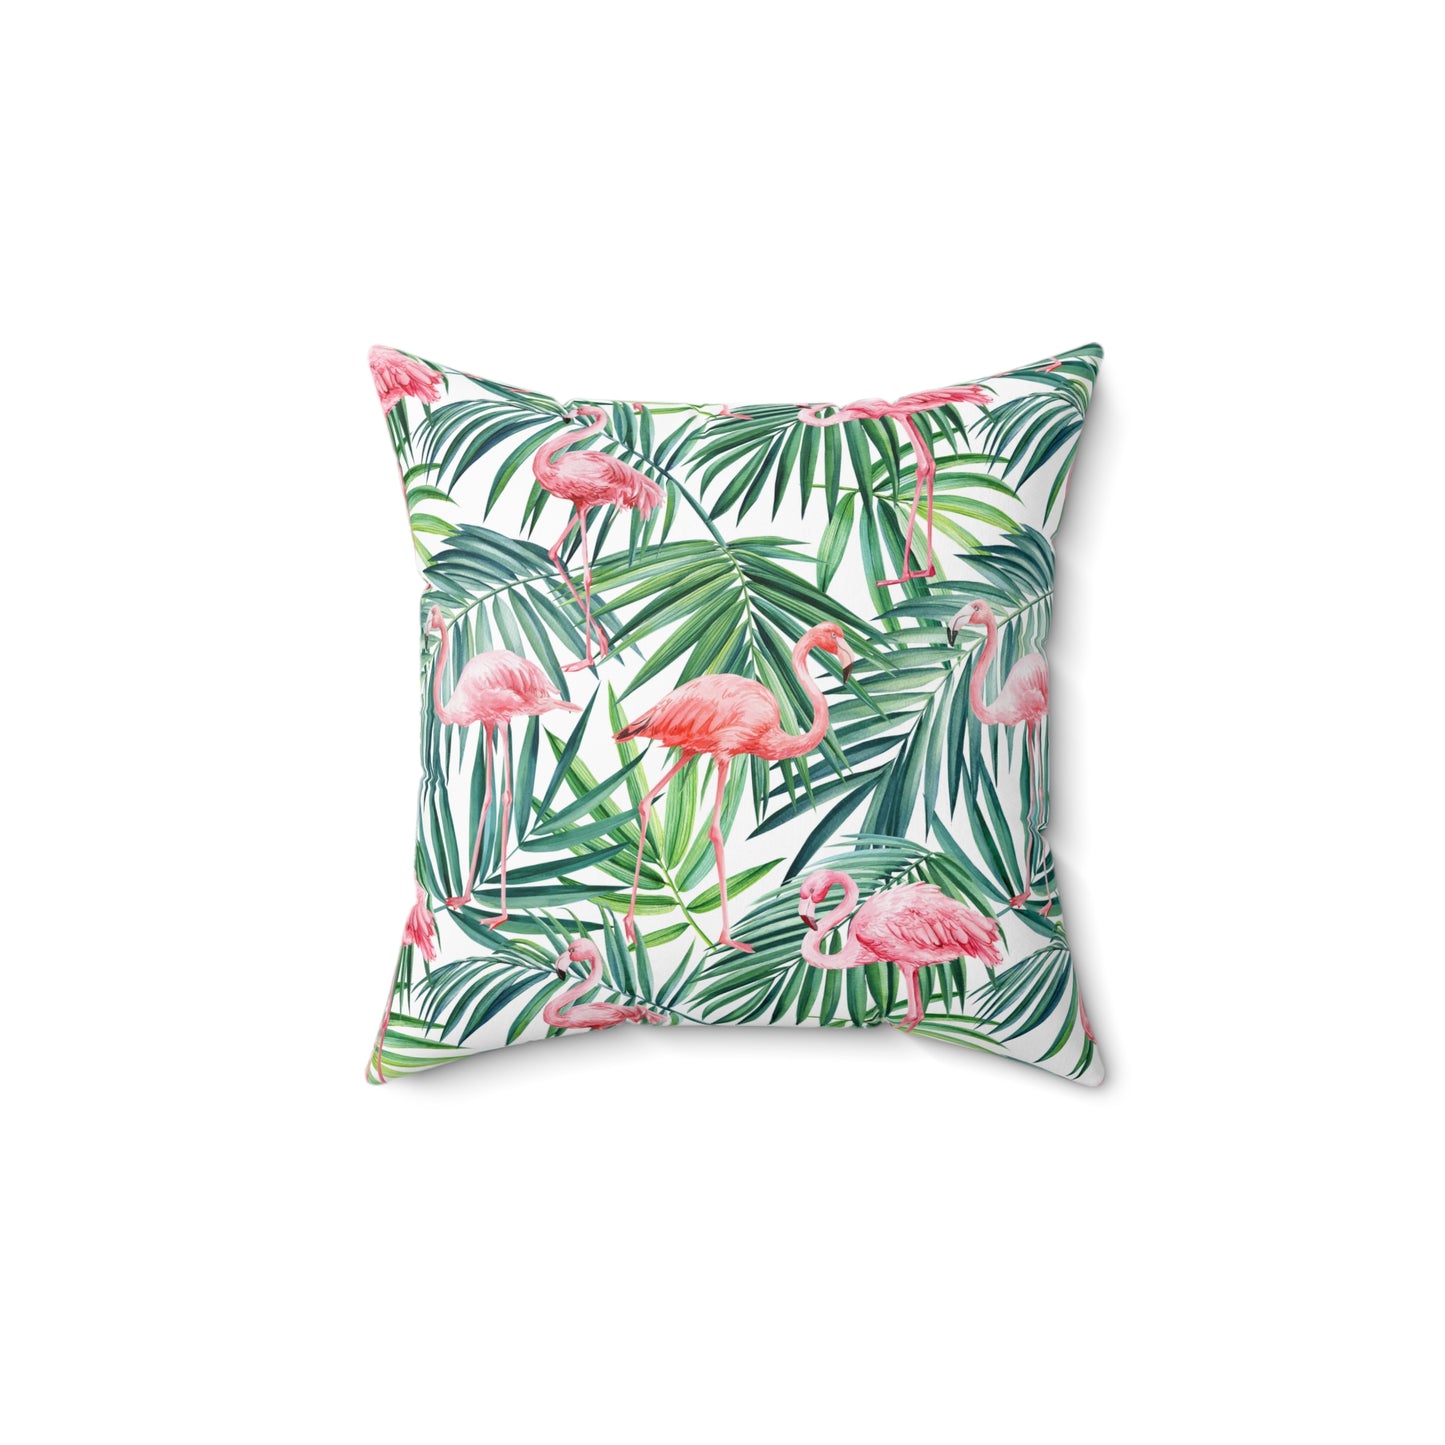 Pink Flamingos and Palm Leaves Spun Polyester Square Pillow